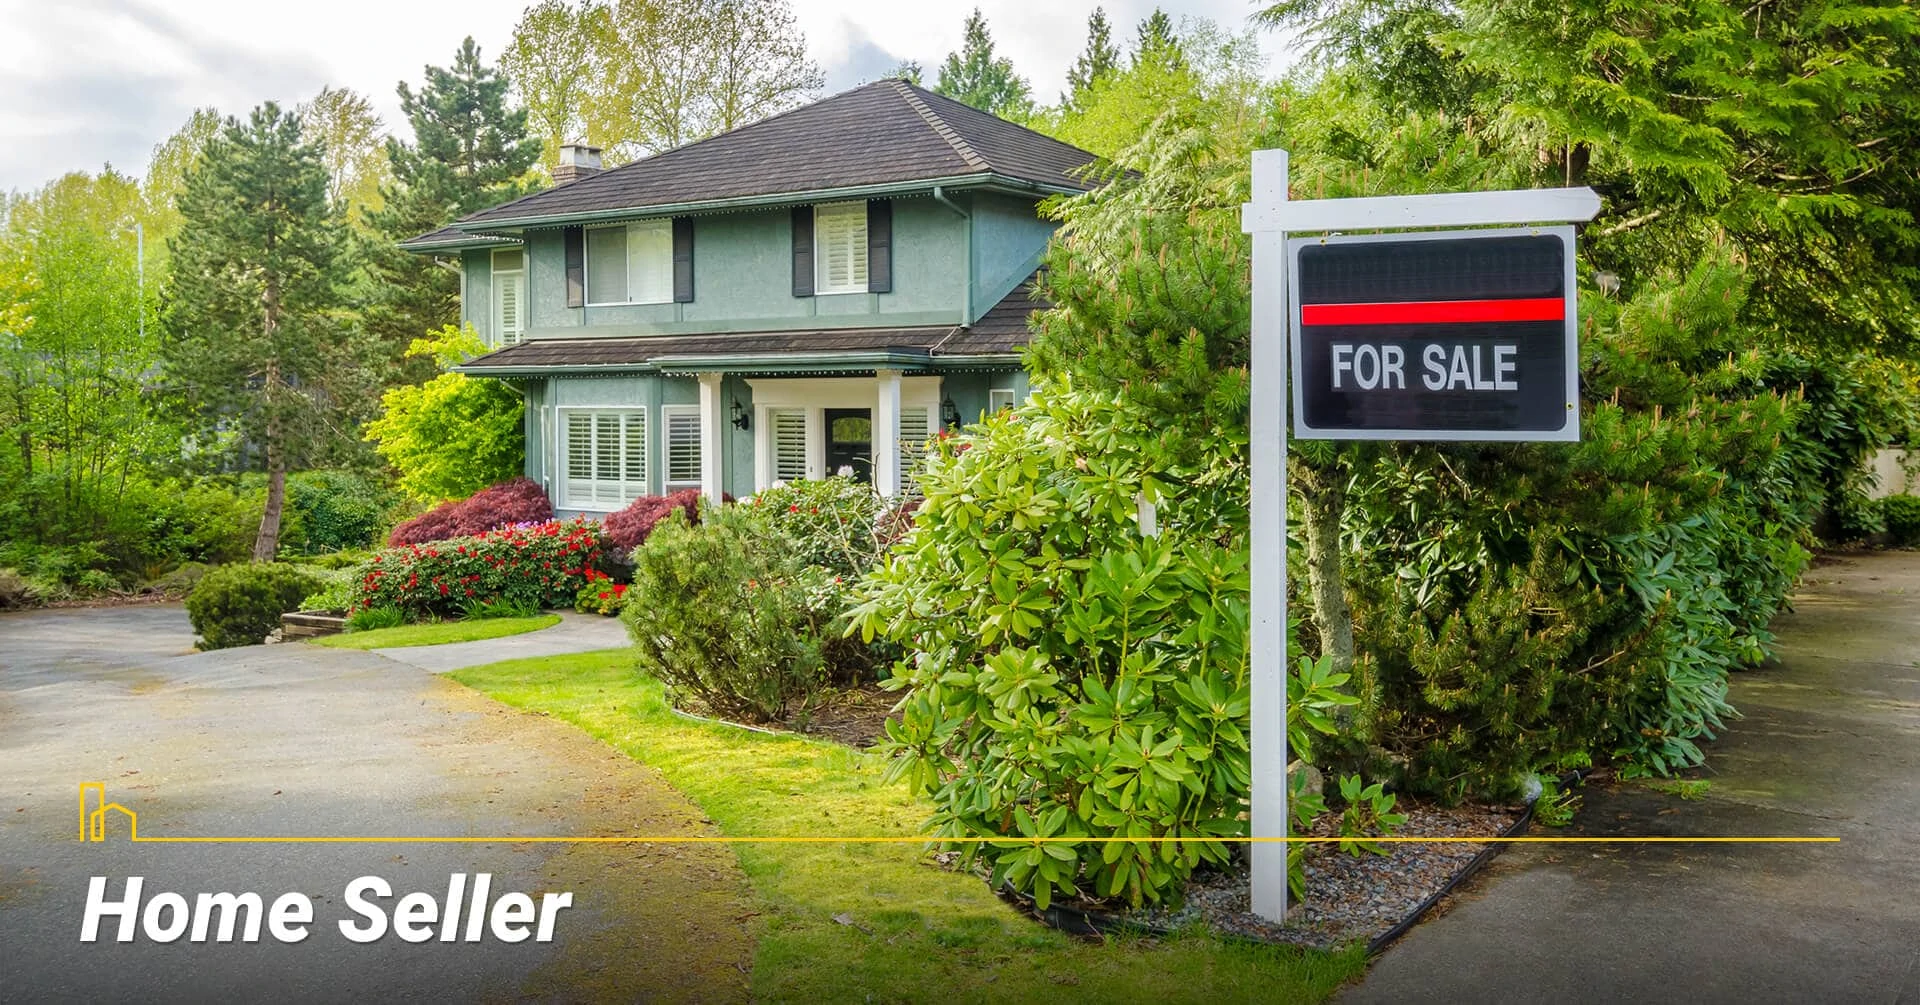 Home Seller, emotions associated with selling your home